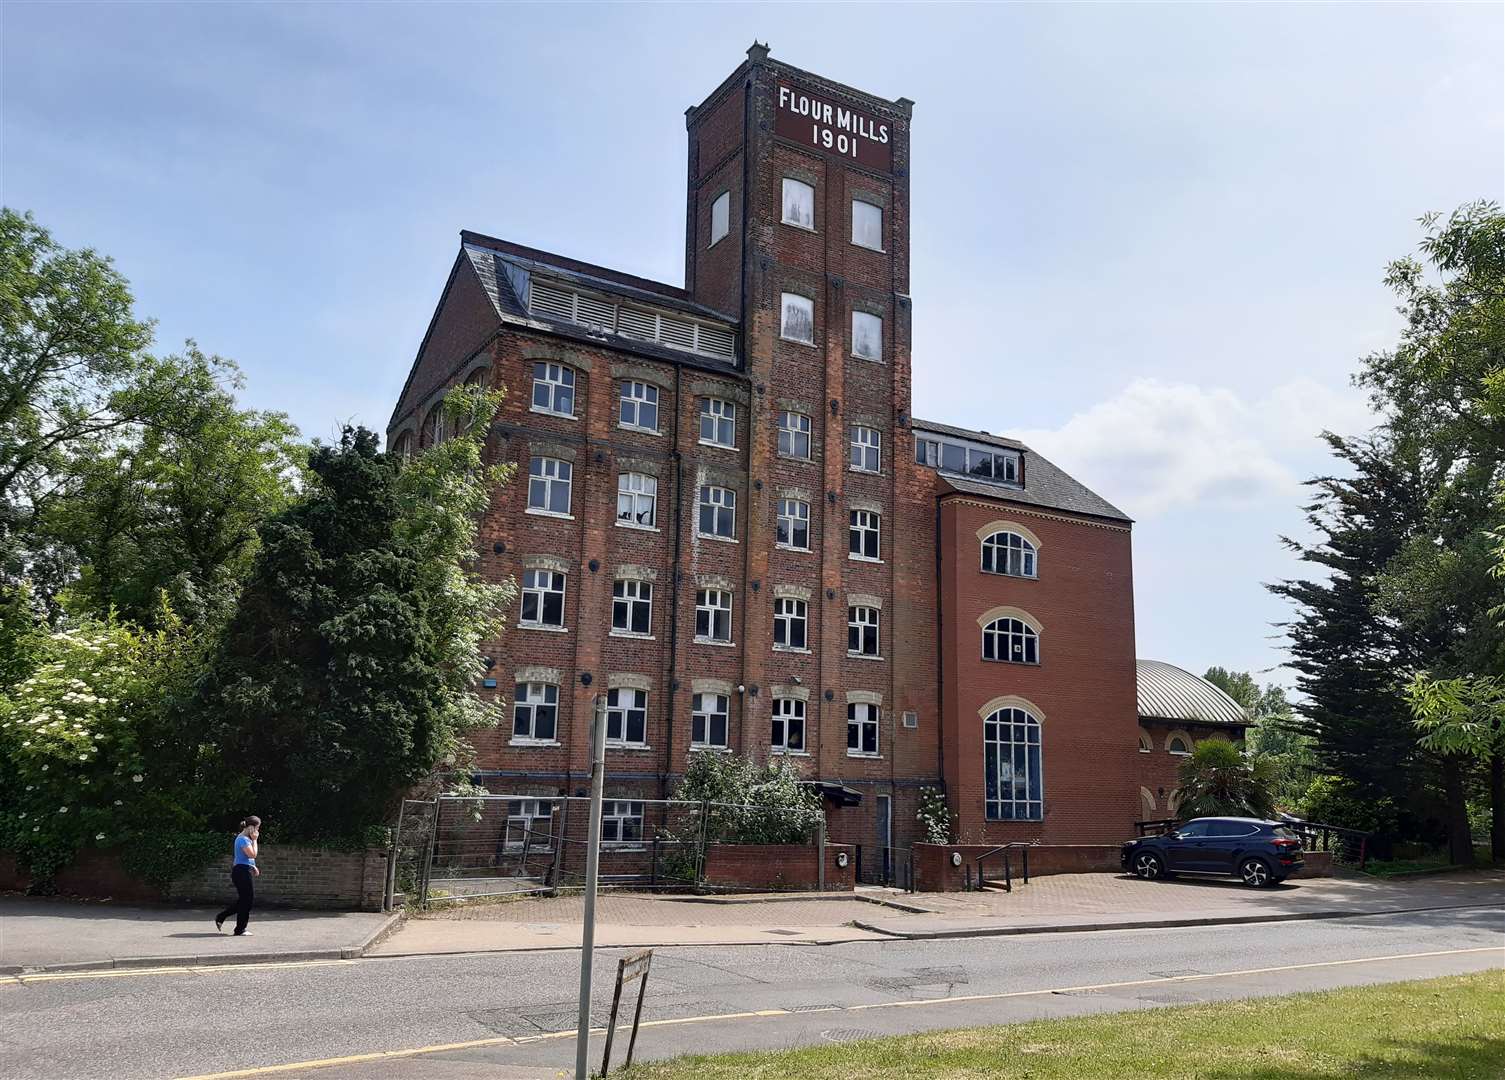 How the former flour mill currently looks